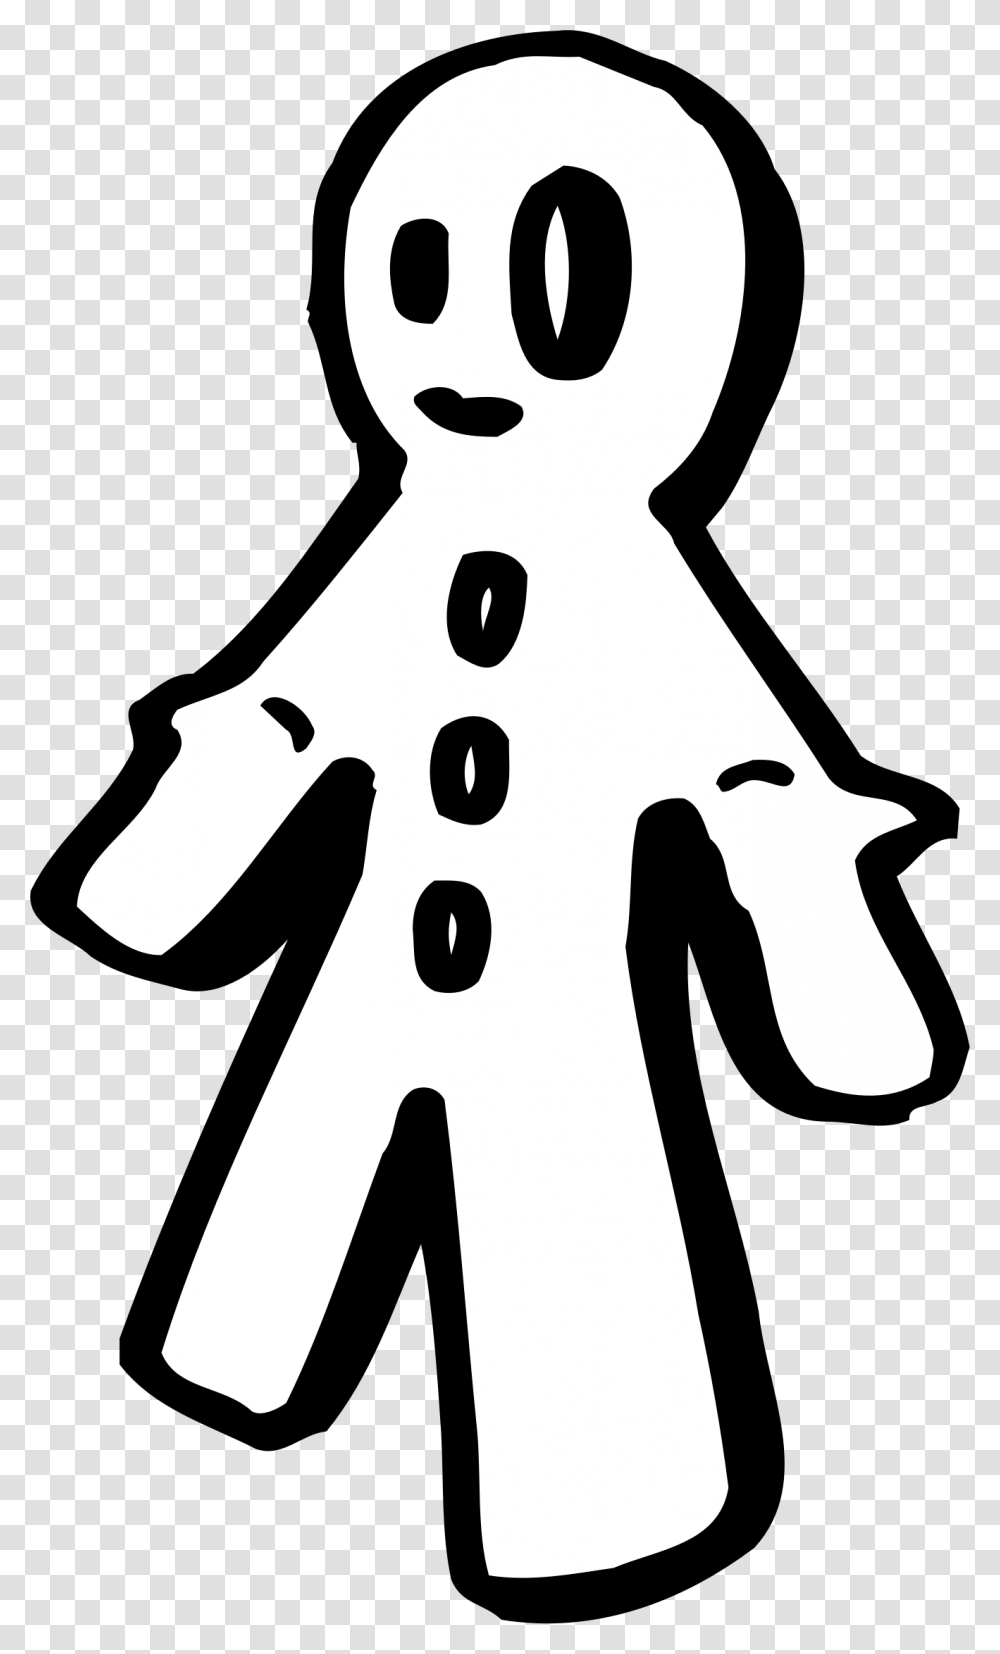 Raseone Gingerbread Man Icons, Stencil, Snowman, Winter, Outdoors Transparent Png